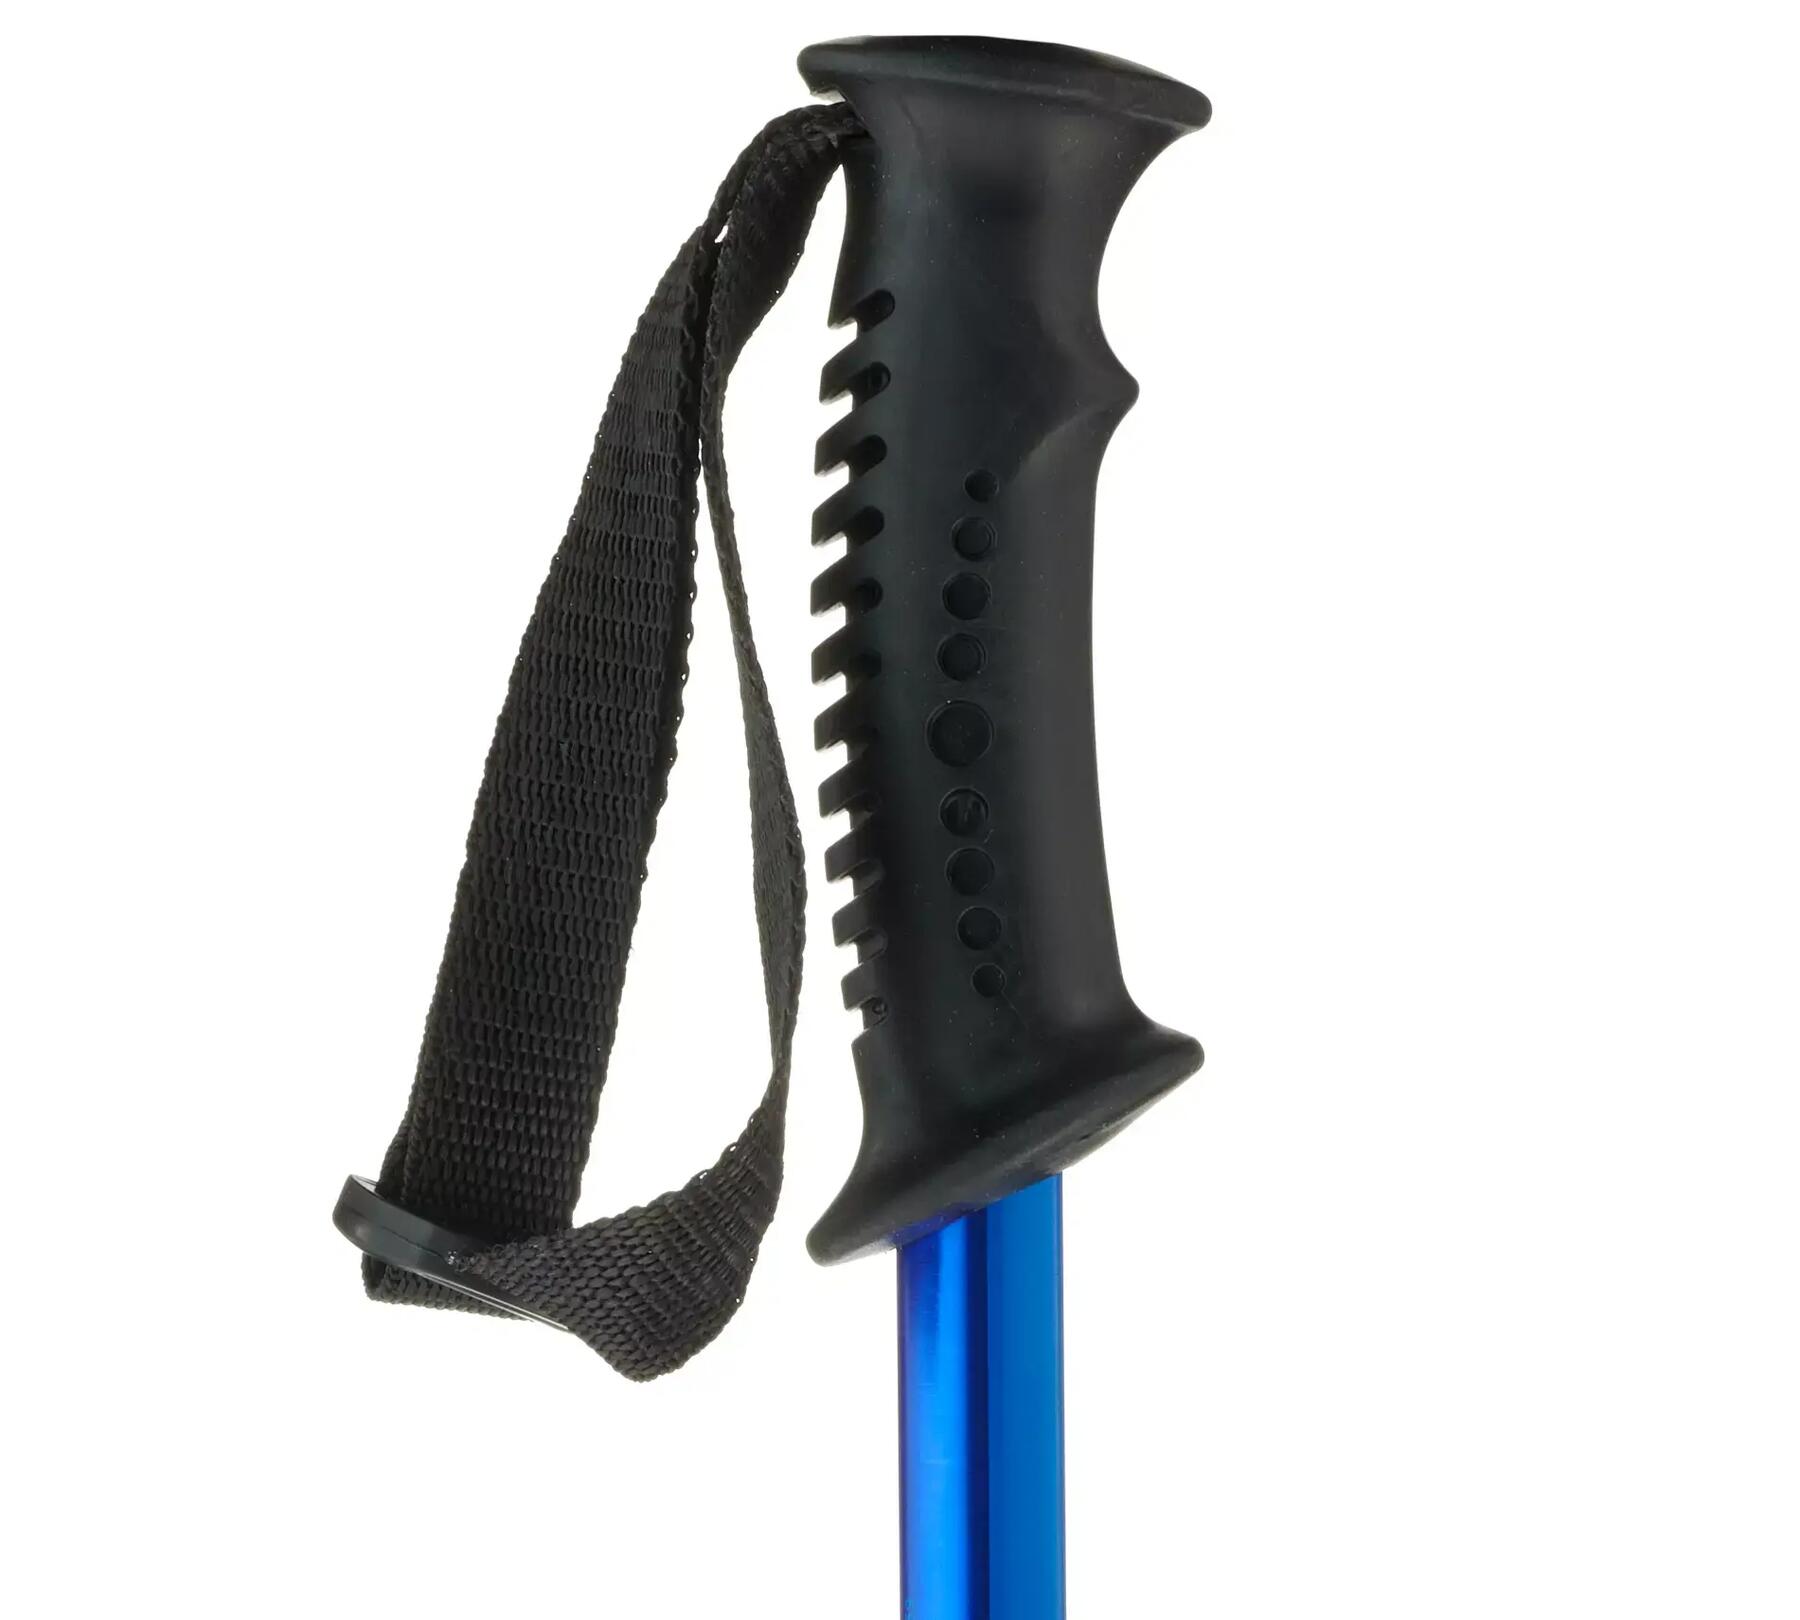 Junior Ski pole with a single material rubber grip